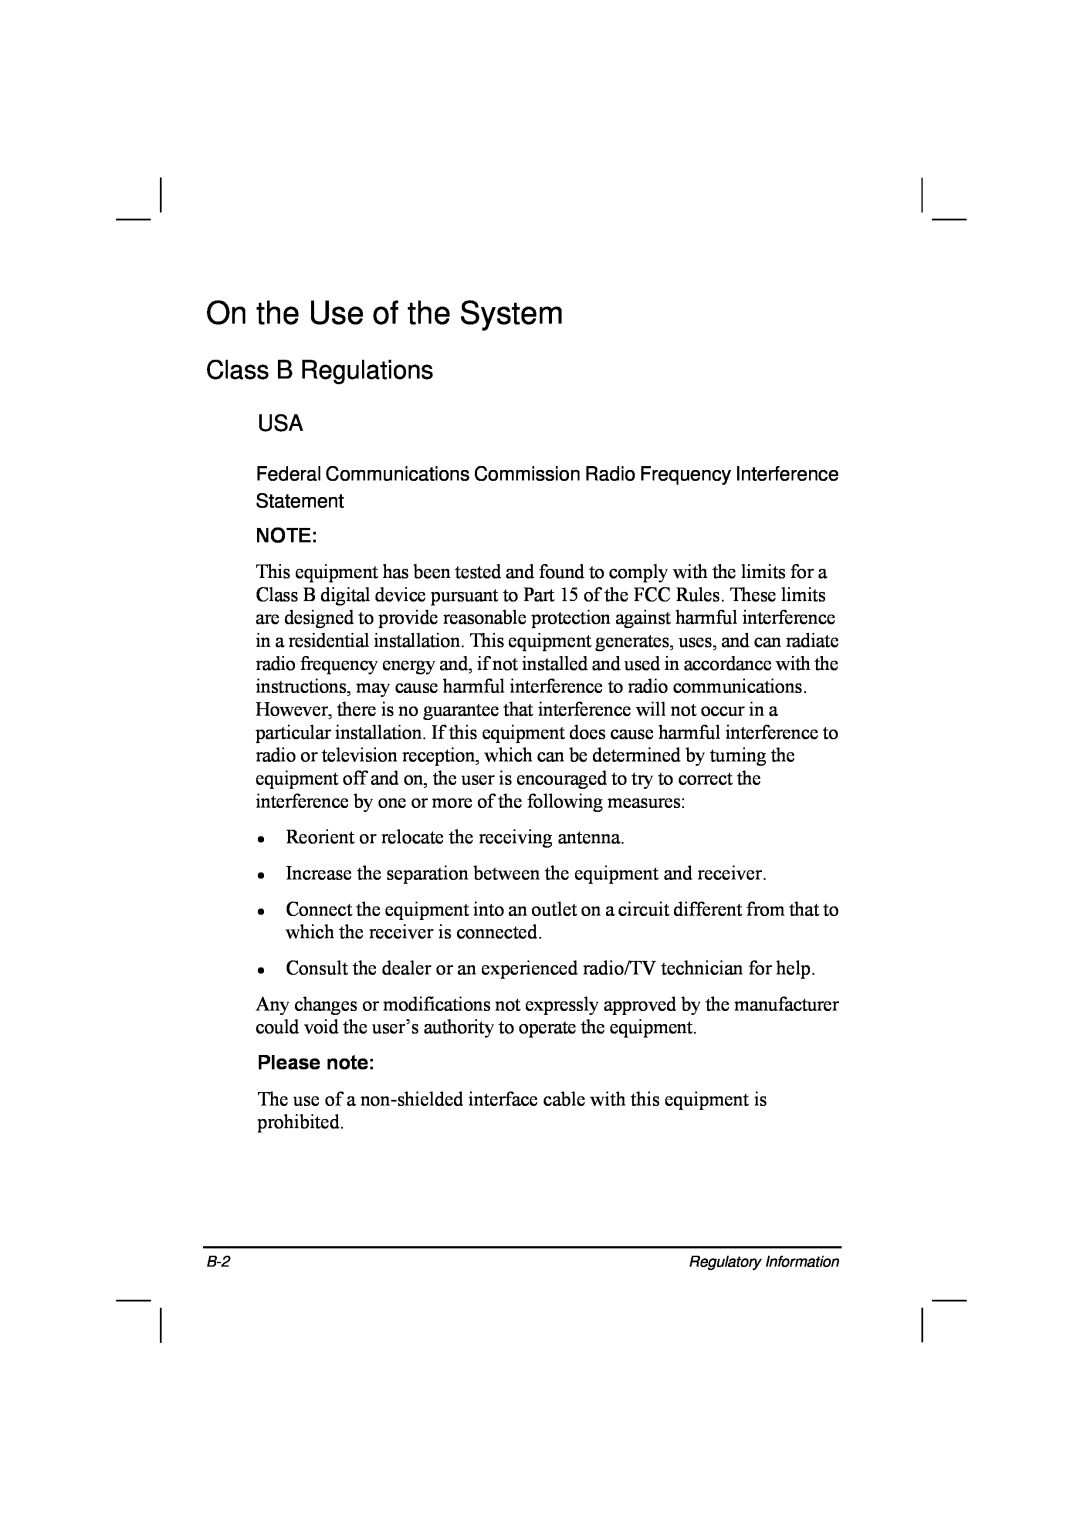 TAG 20 Series manual On the Use of the System, Class B Regulations, Please note, Regulatory Information 